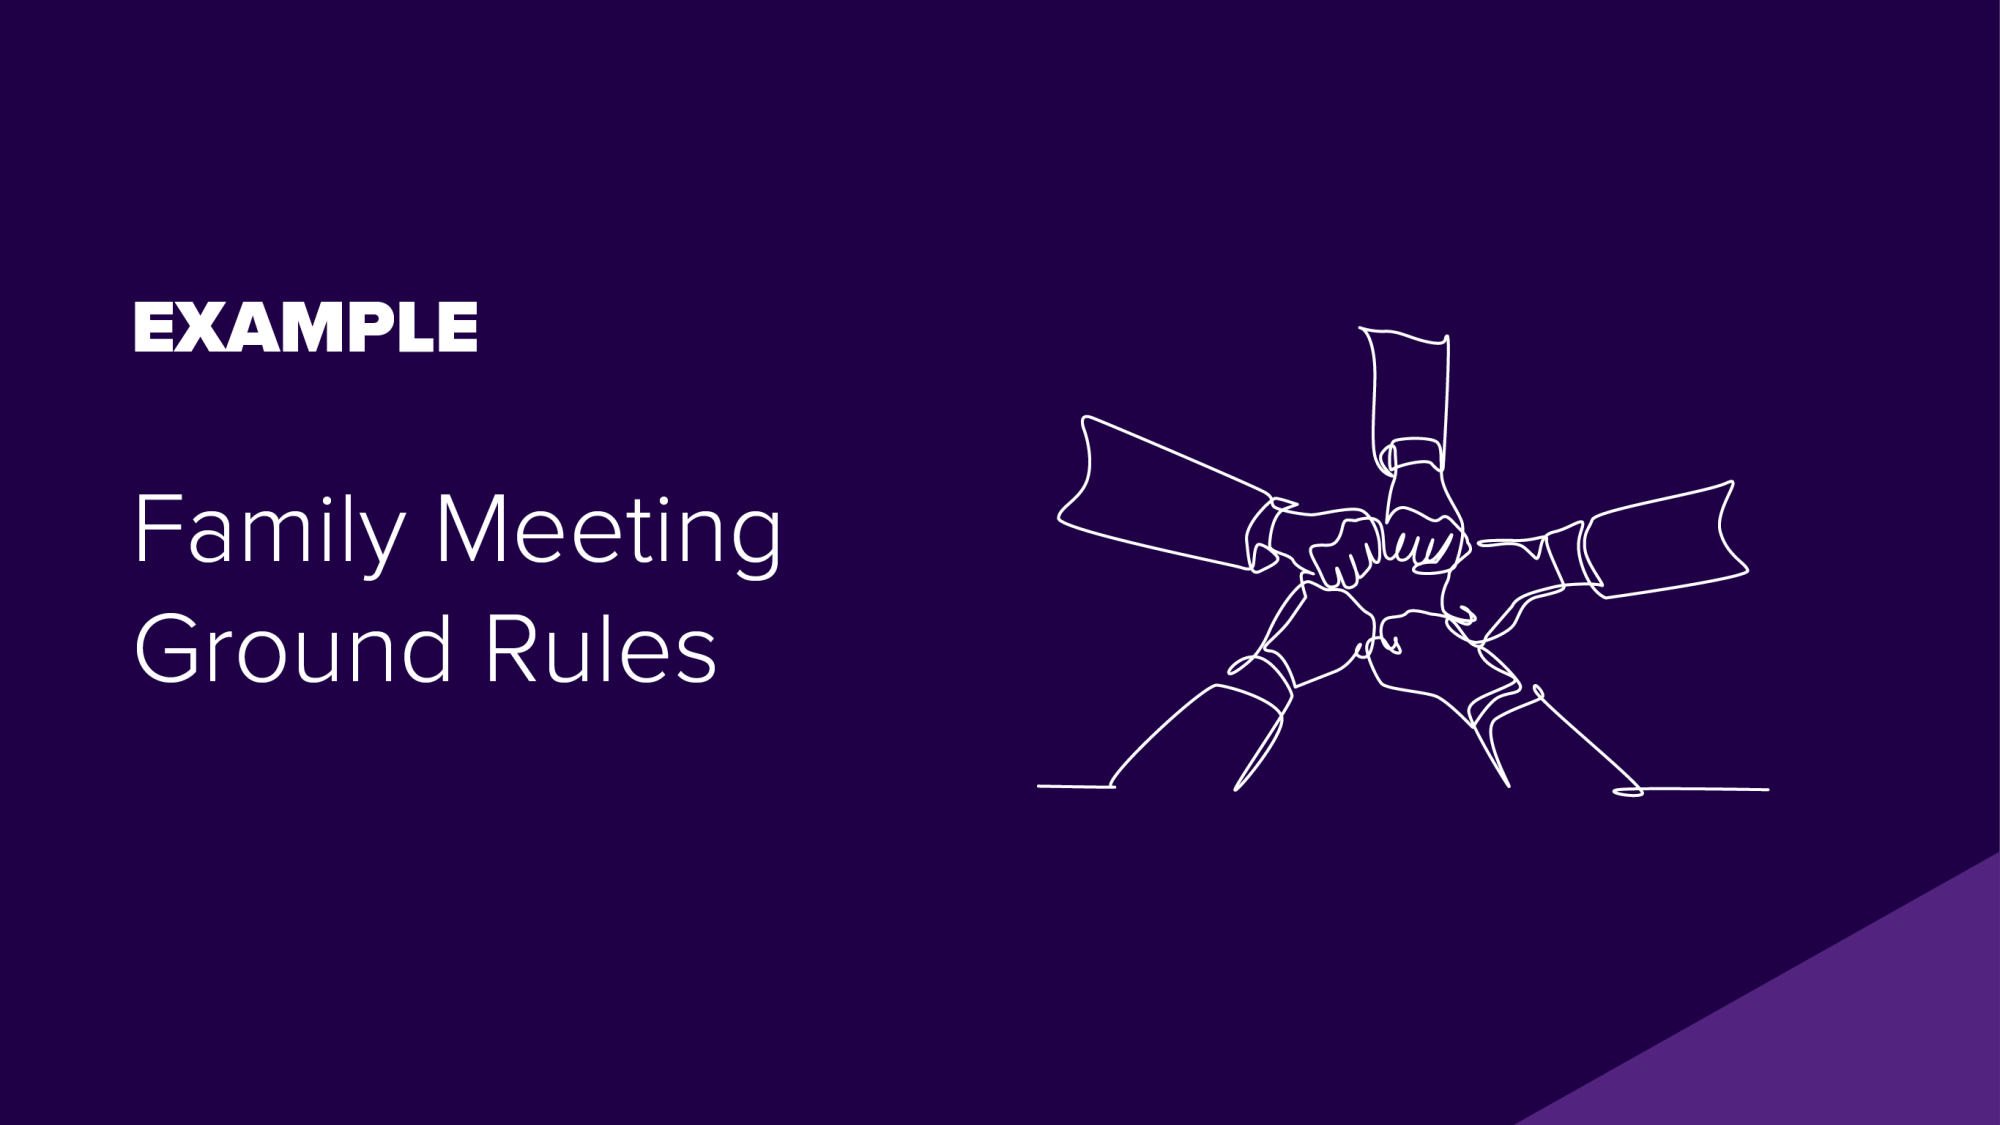 Example: Family Meeting Ground Rules